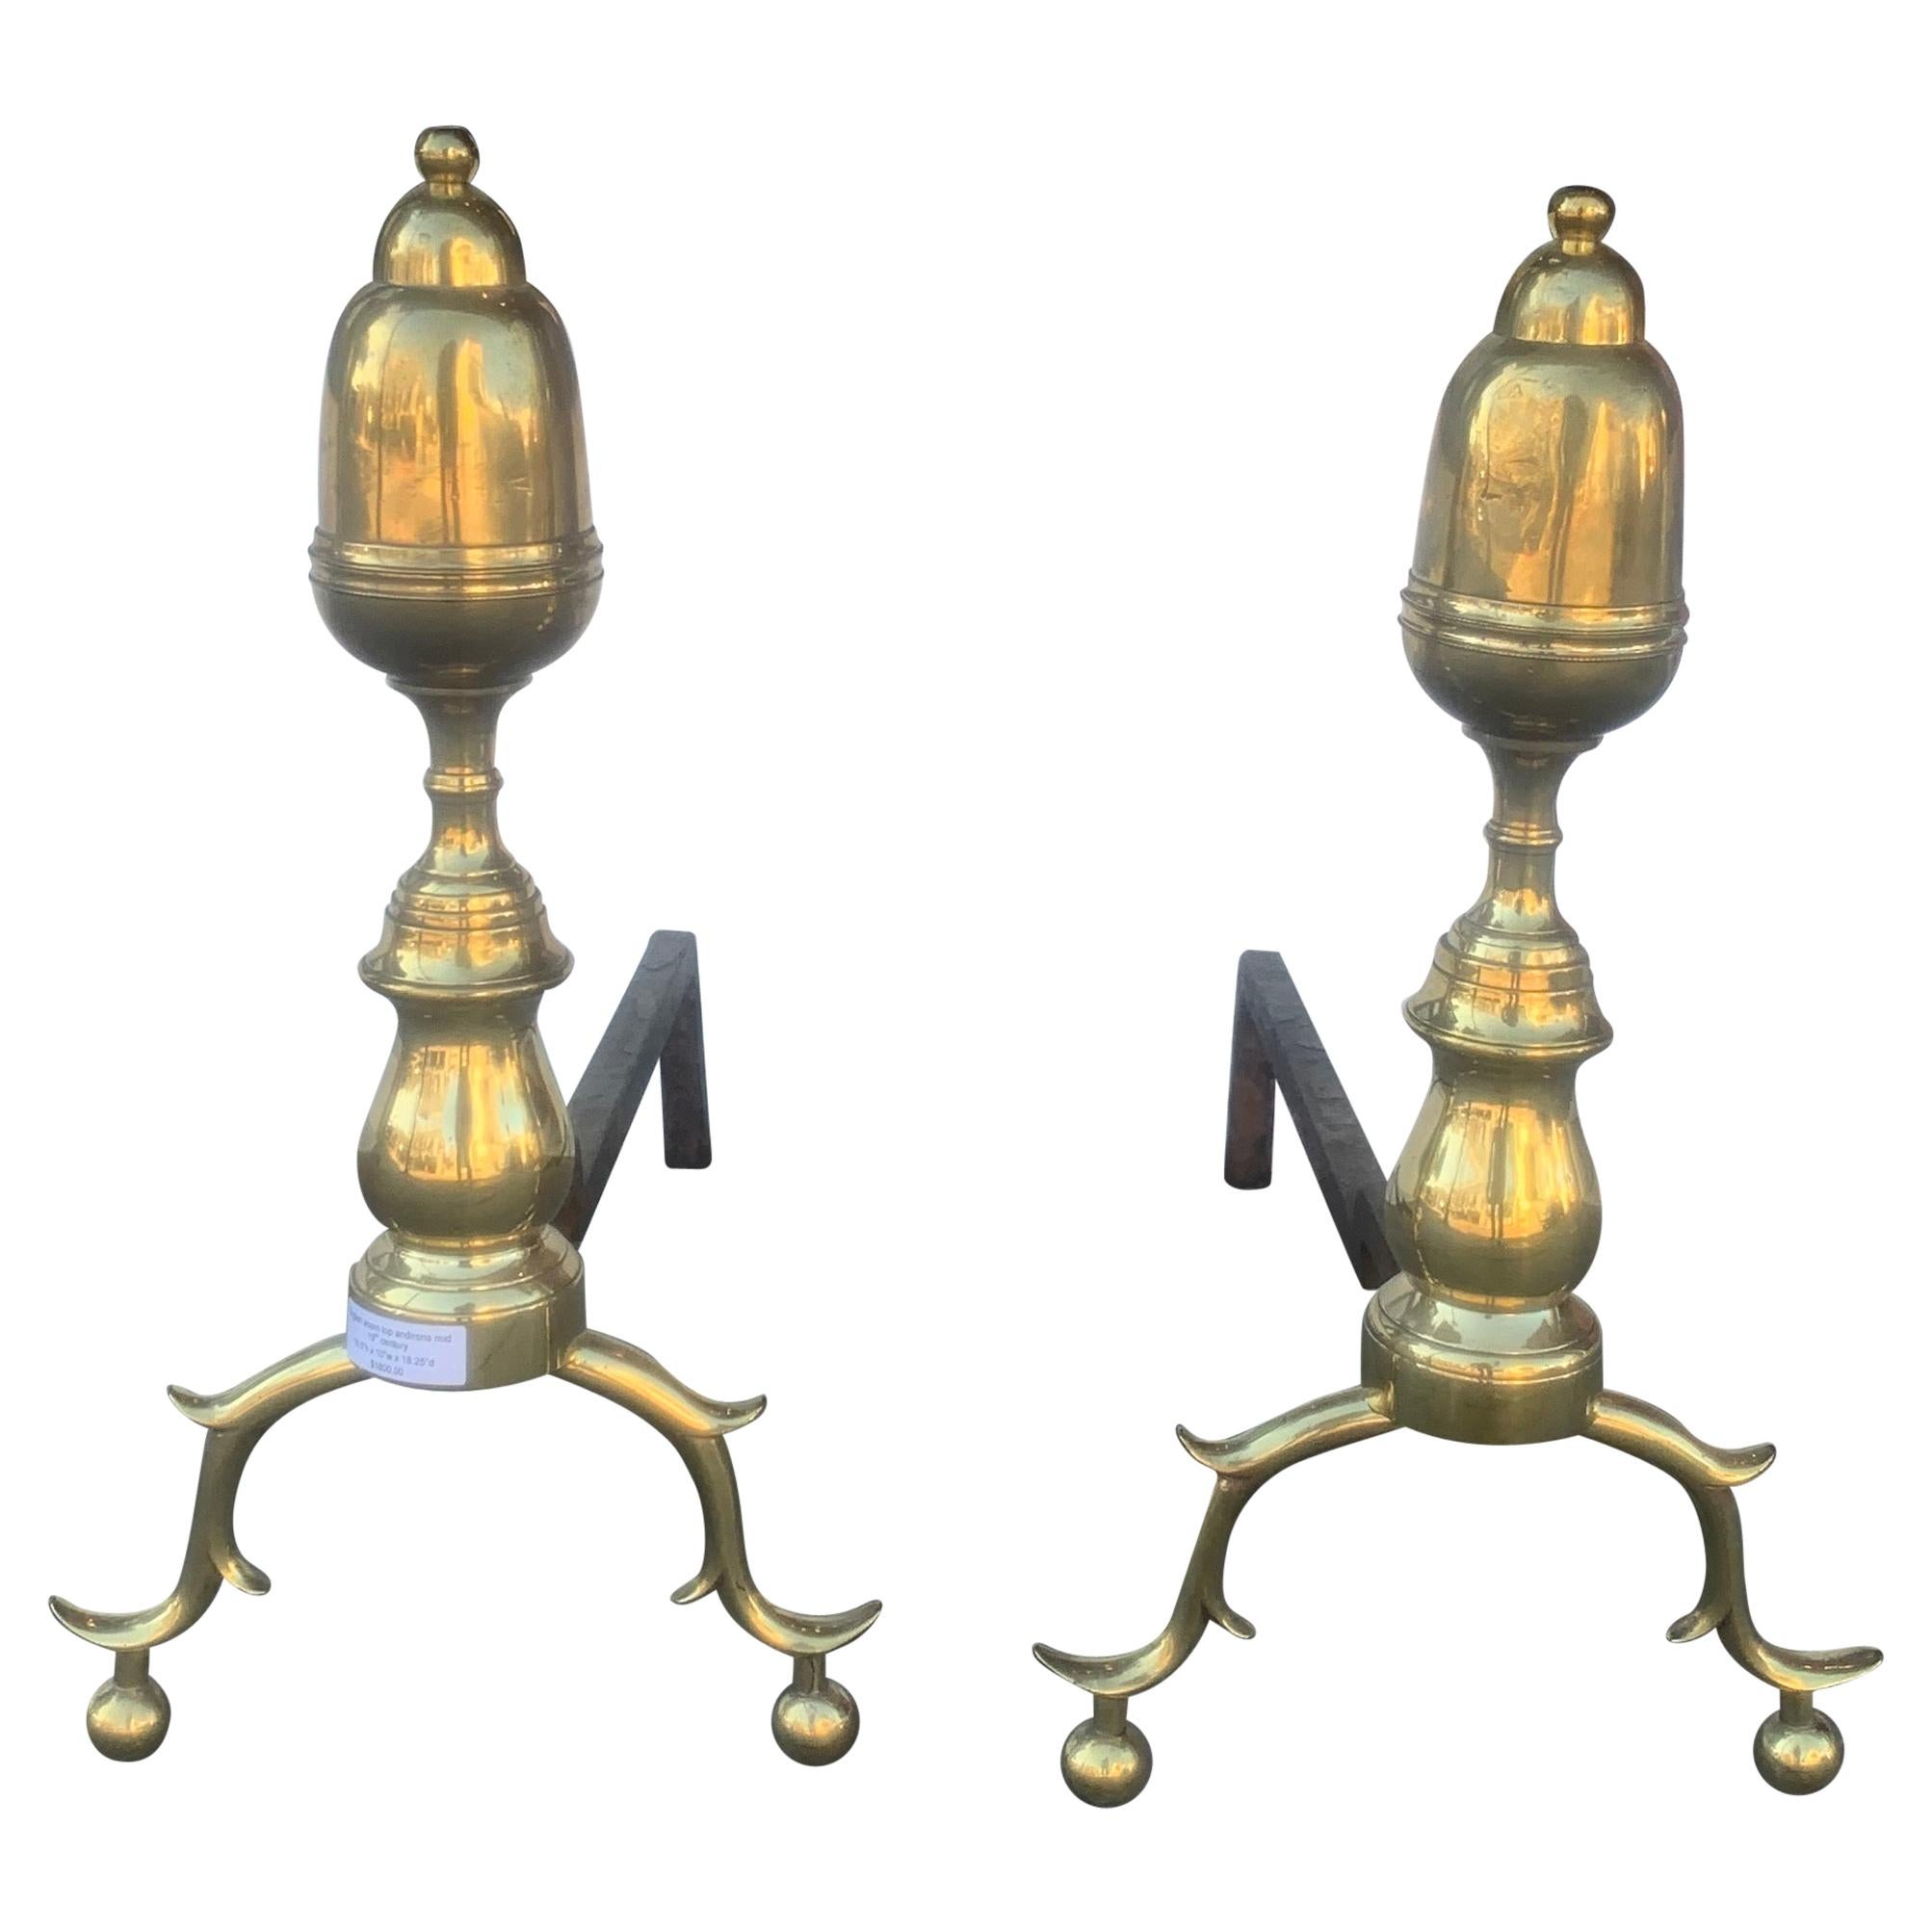 English Mid-19th Century Brass Acorn Top Andirons For Sale